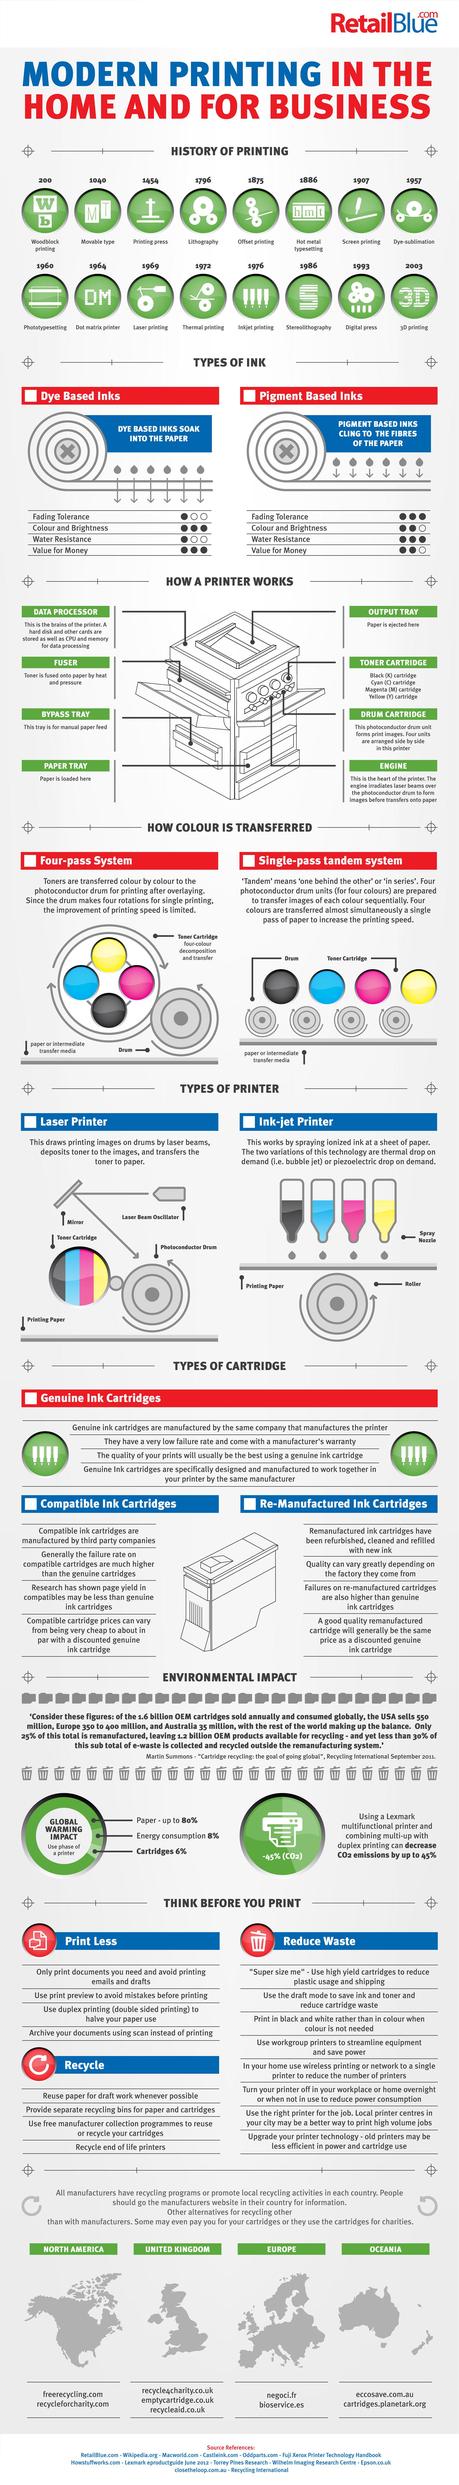 Infographic on the Development of Printing